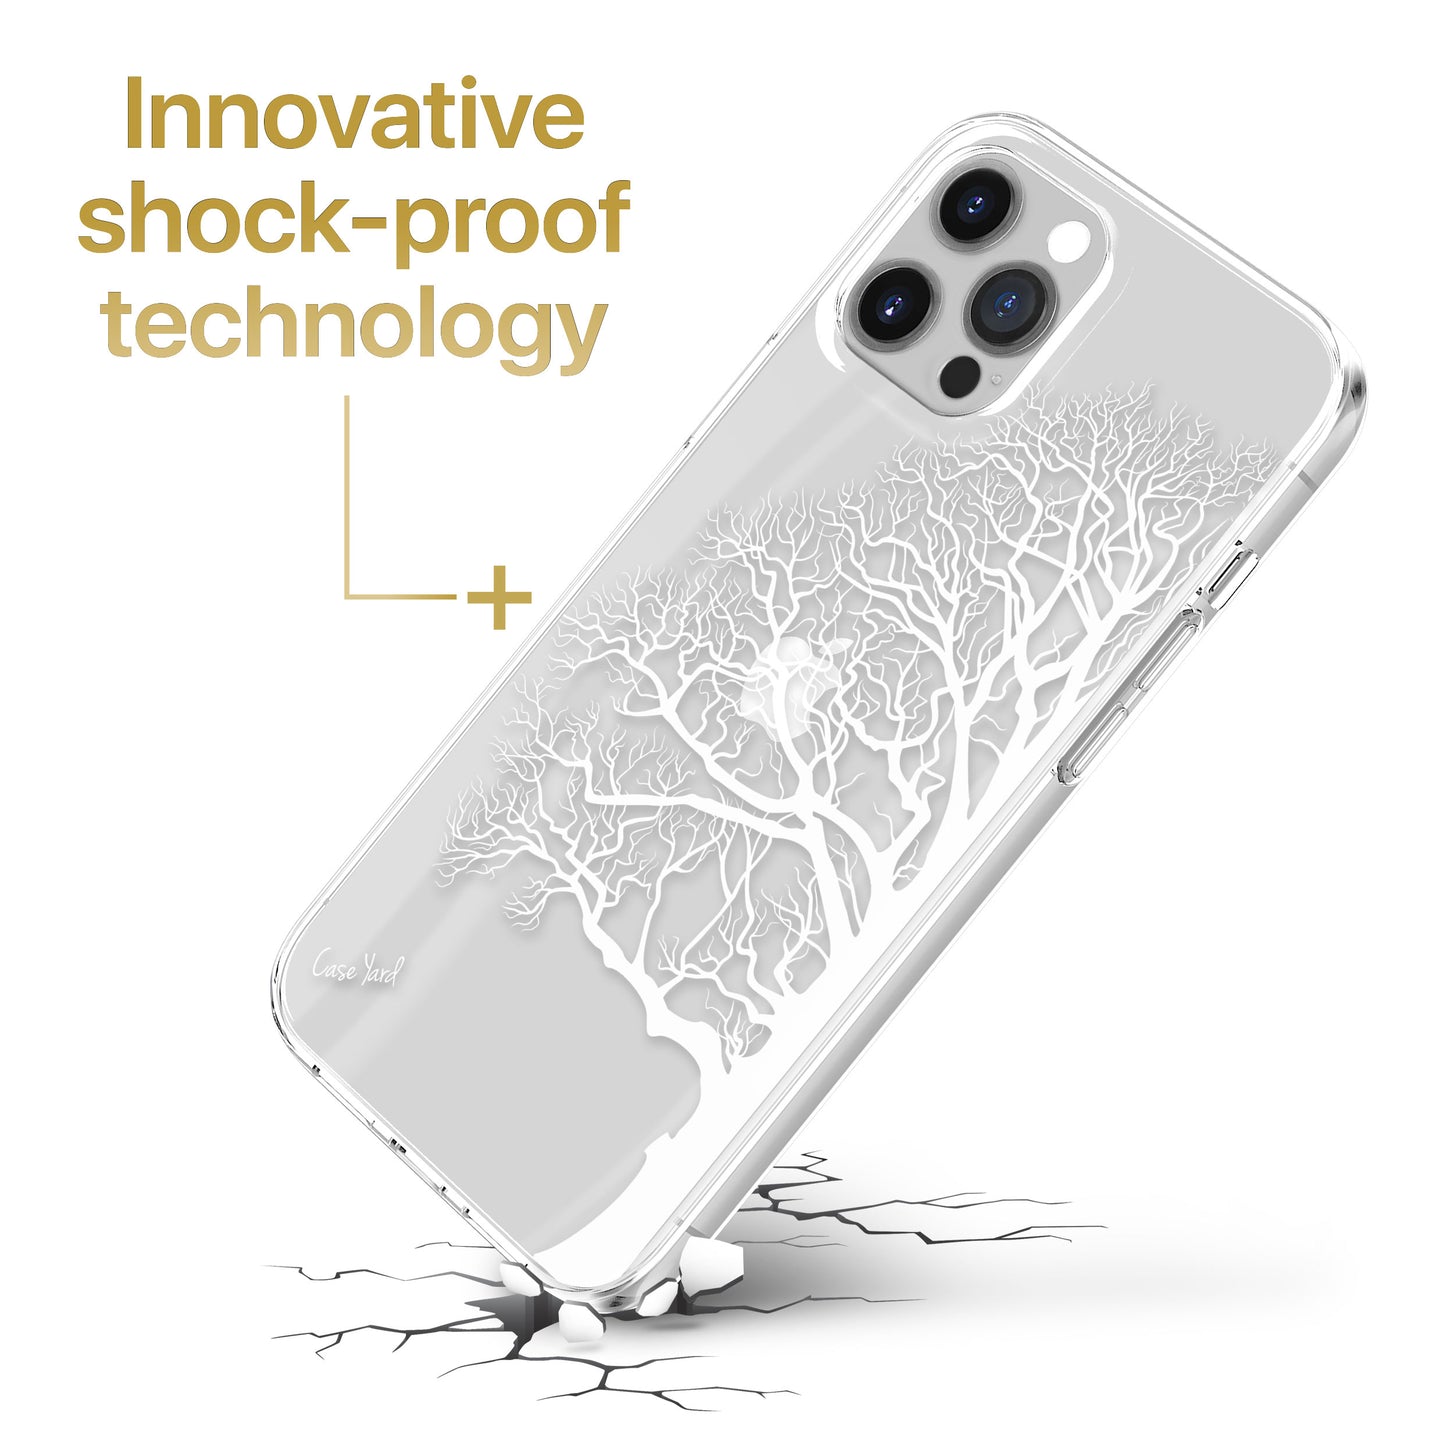 TPU Case Clear case with (Half Tree) Design for iPhone & Samsung Phones